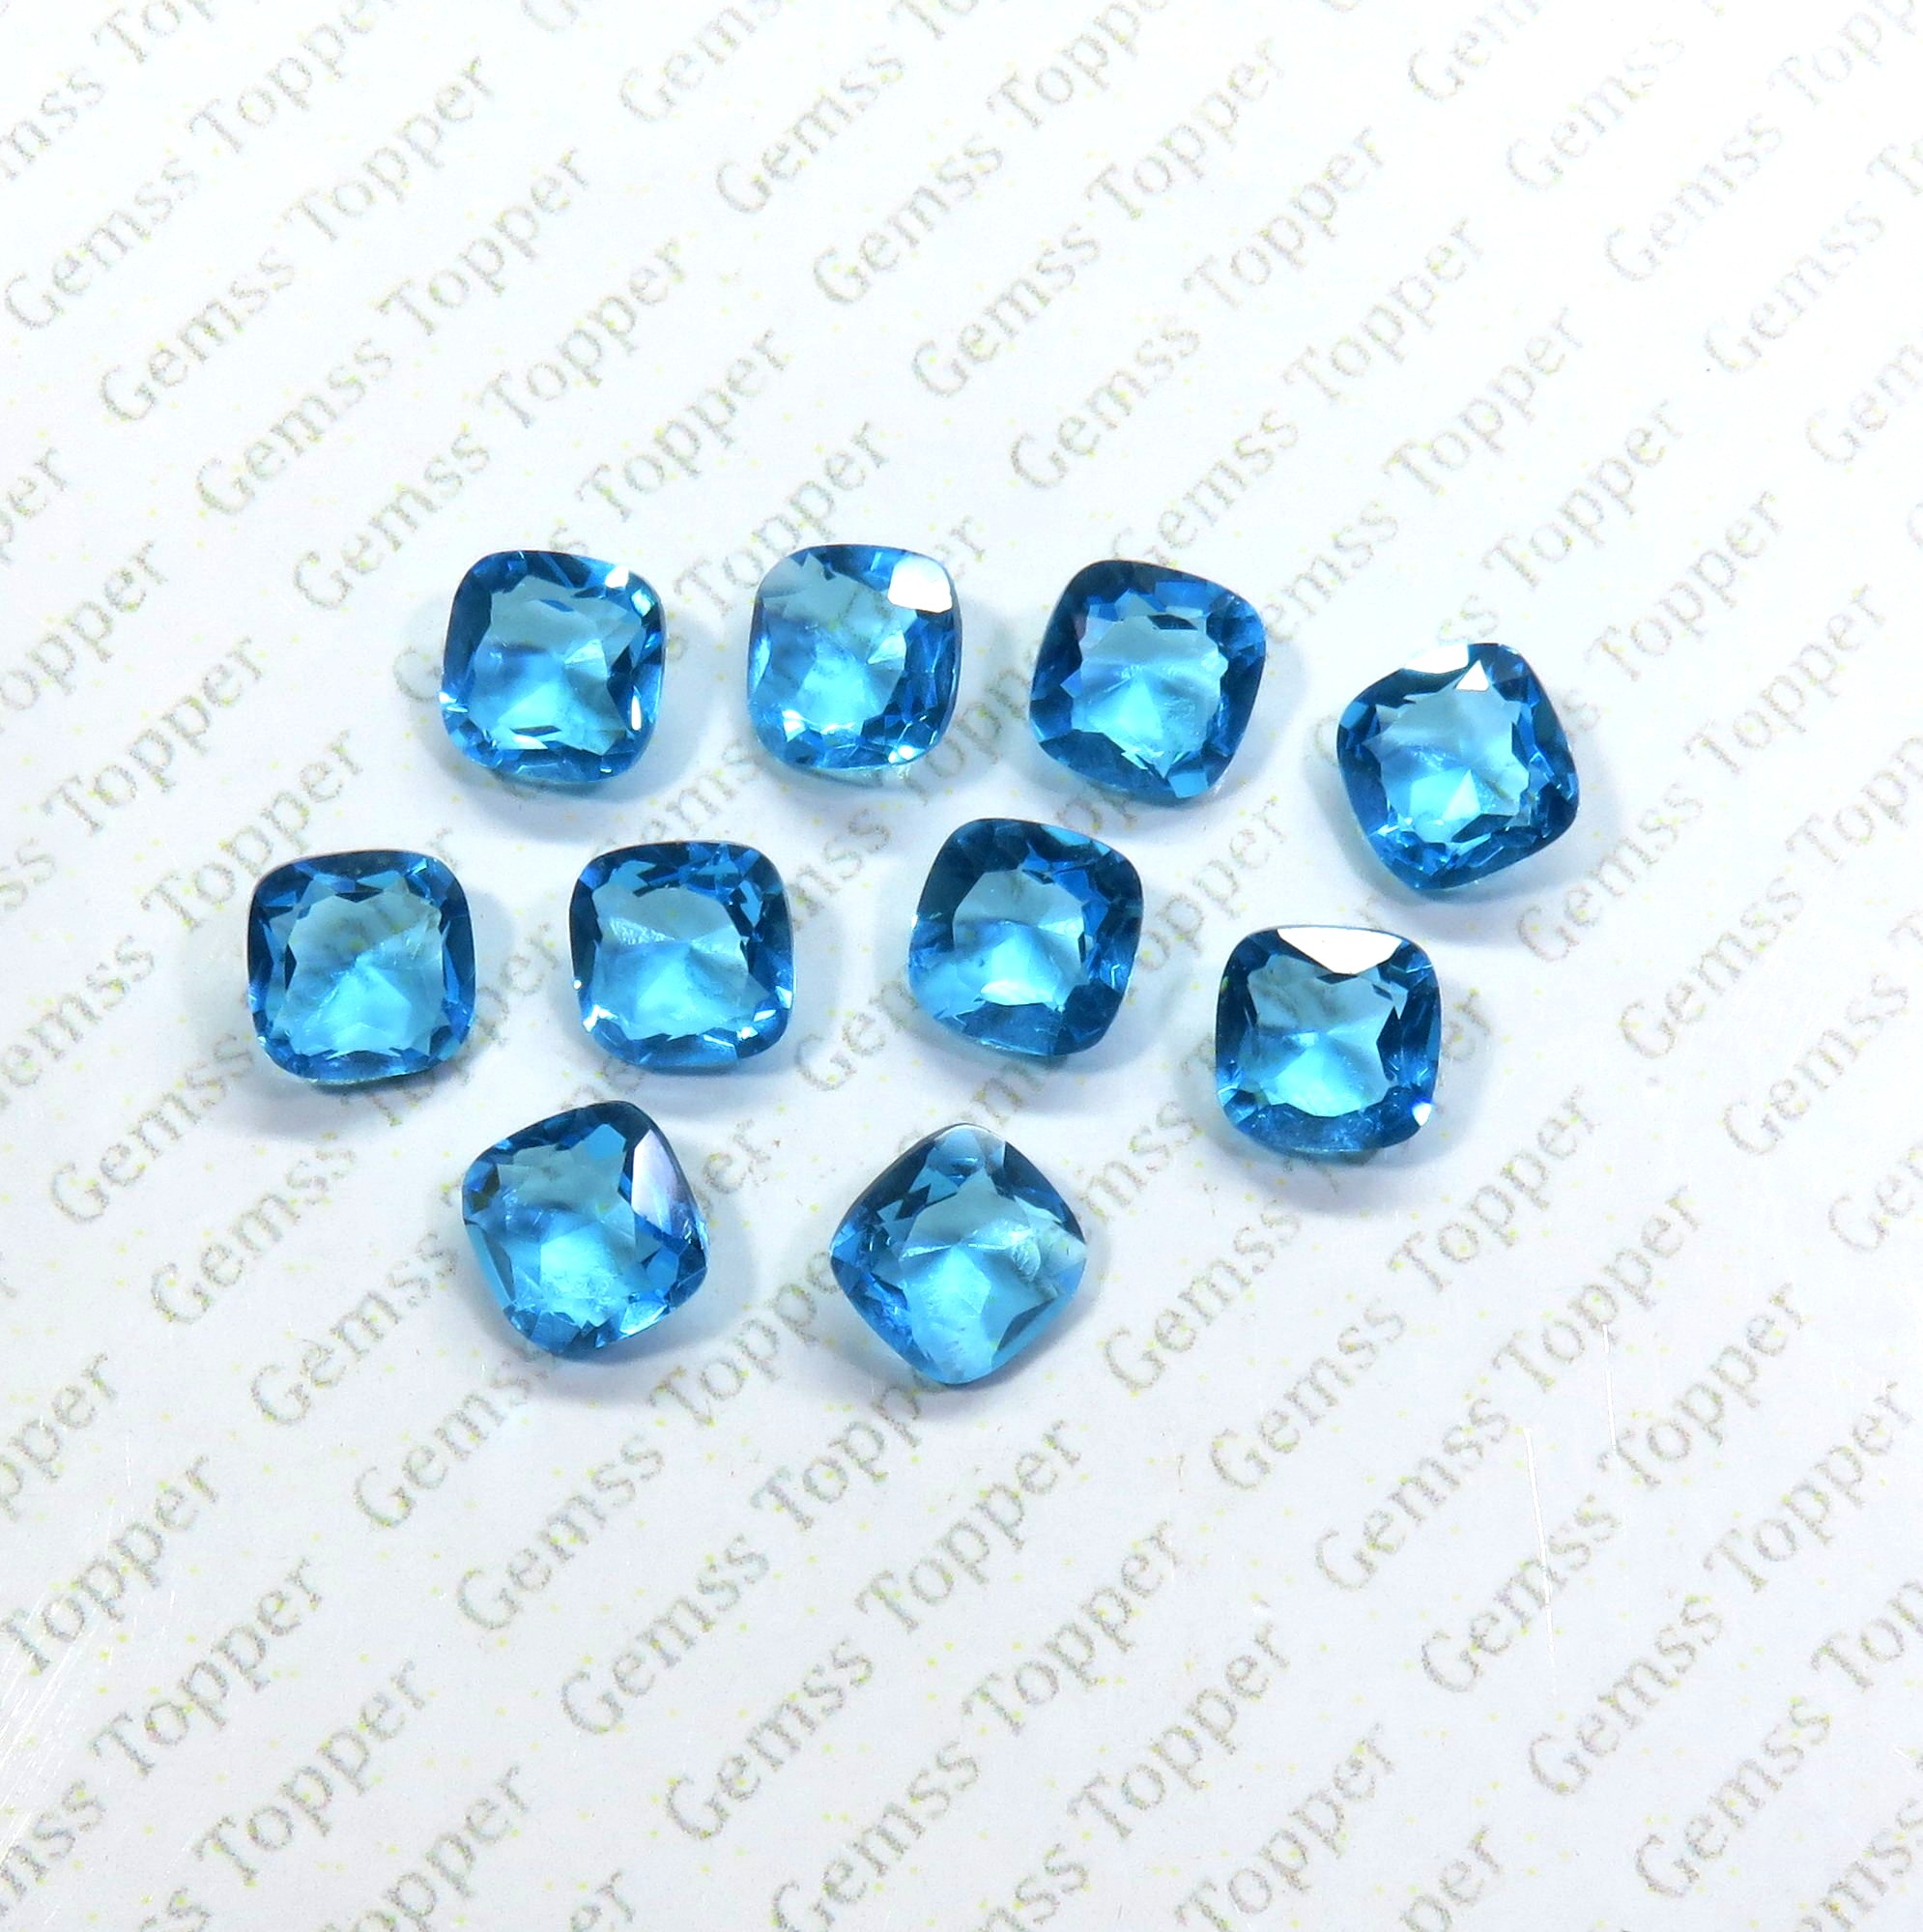 100% Natural Swiss Blue Topaz 5 mm Cushion Faceted- AAA Quality Swiss Blue Topaz Faceted Cushion